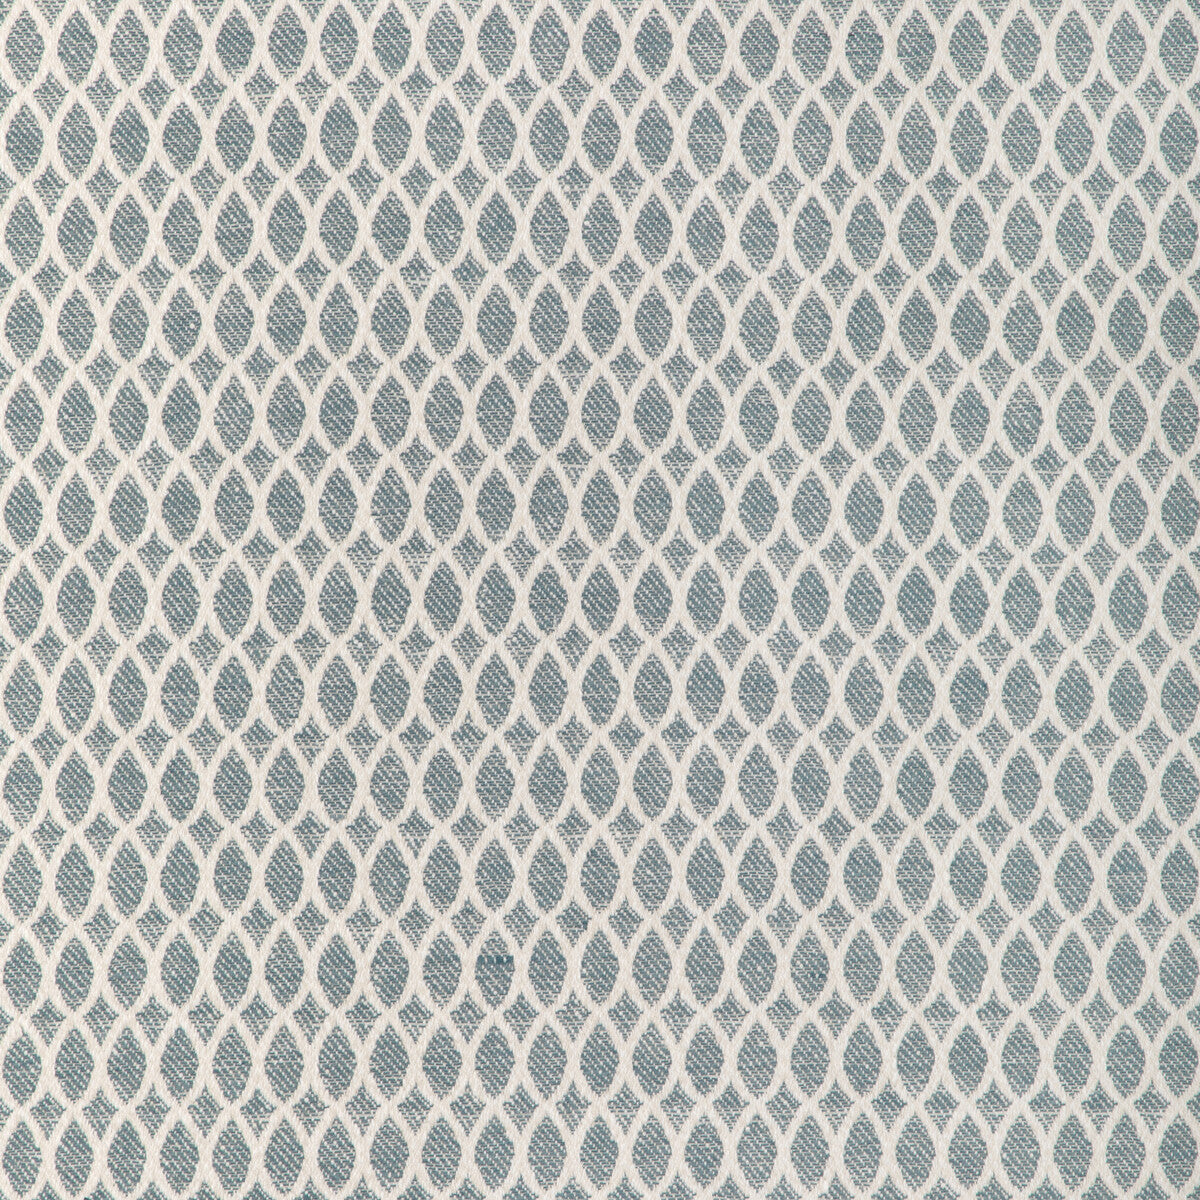 Kravet Design fabric in 37114-5 color - pattern 37114.5.0 - by Kravet Design in the Woven Colors collection